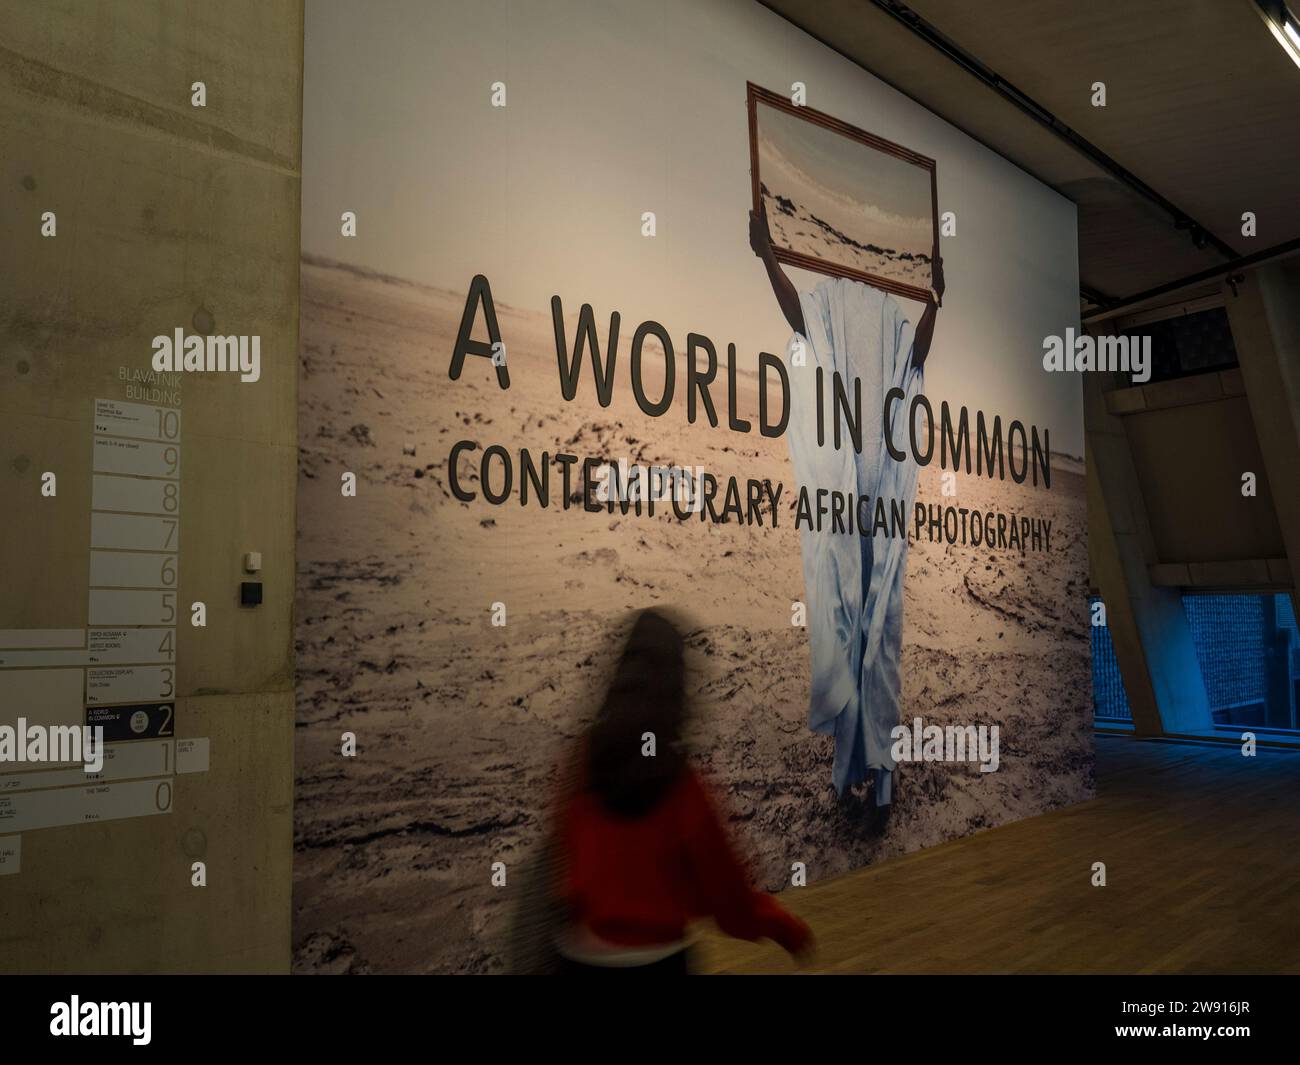 A World in Common, Contemporary African Photography, Tate Modern, South Bank, London, England, Großbritannien, GB. Stockfoto